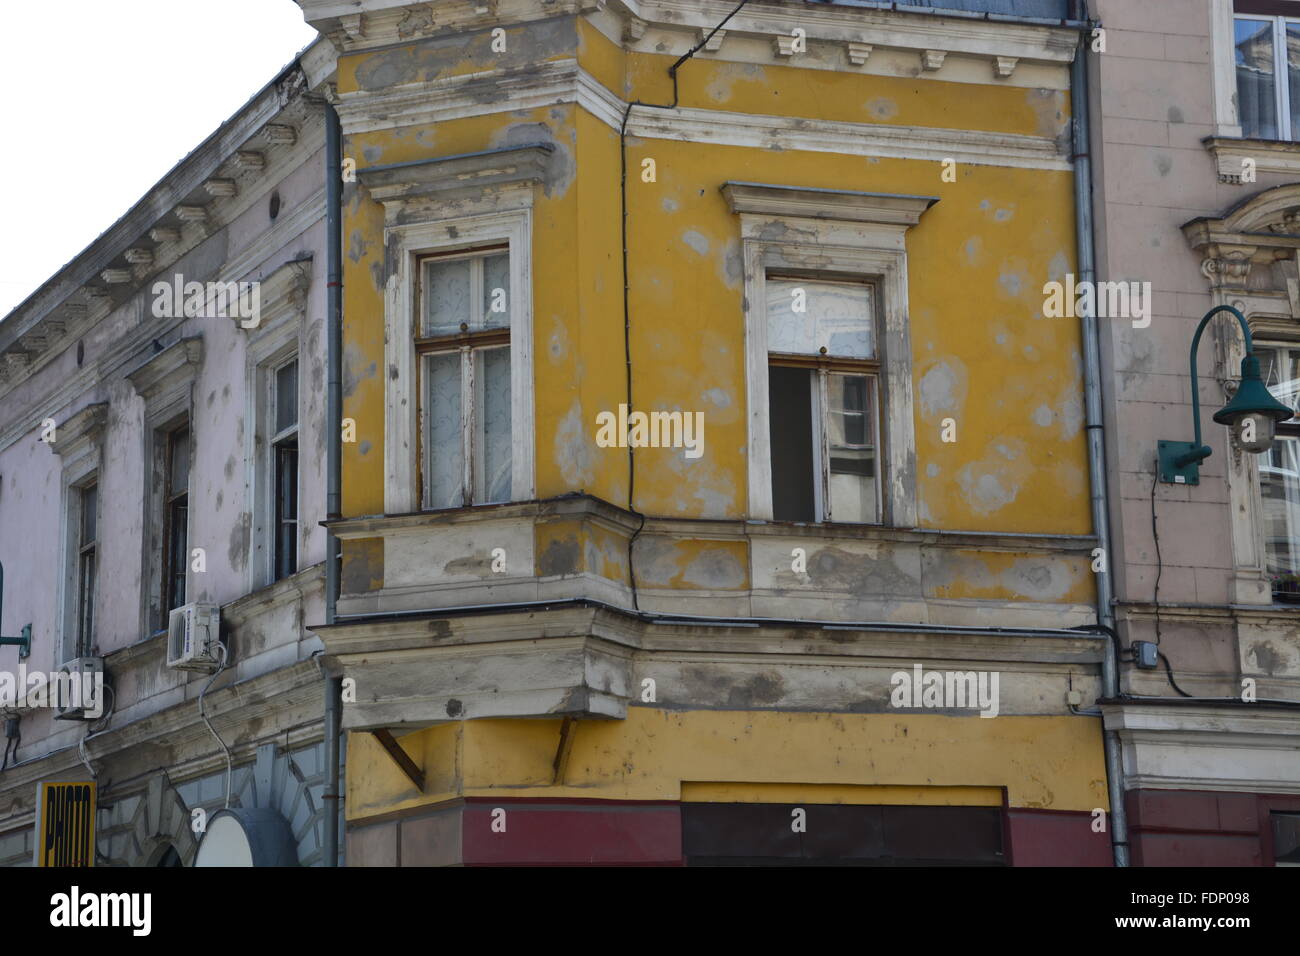 Many buildings in Sarajevo still show the damage scars of the 1992-96 siege of the city. Stock Photo